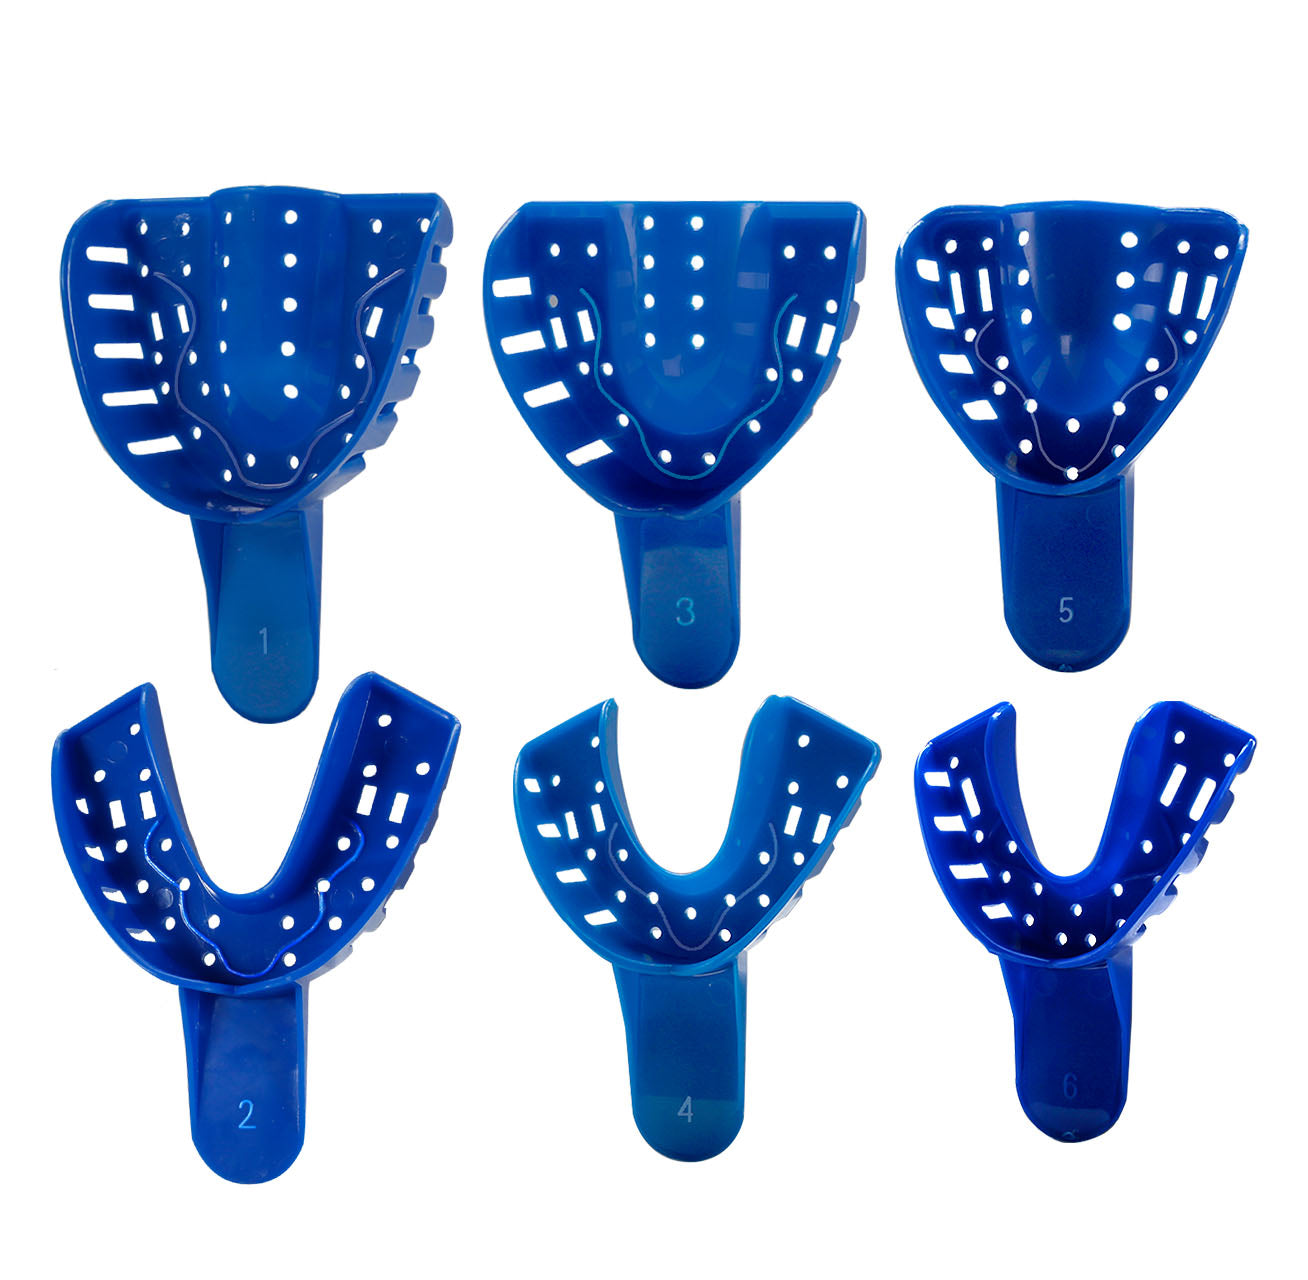 Royal Blue Premium Disposable Tracking Spacer Plastic Dental Impression Trays 12 PC Small, Medium, Large, Upper-Left, Lower-Right